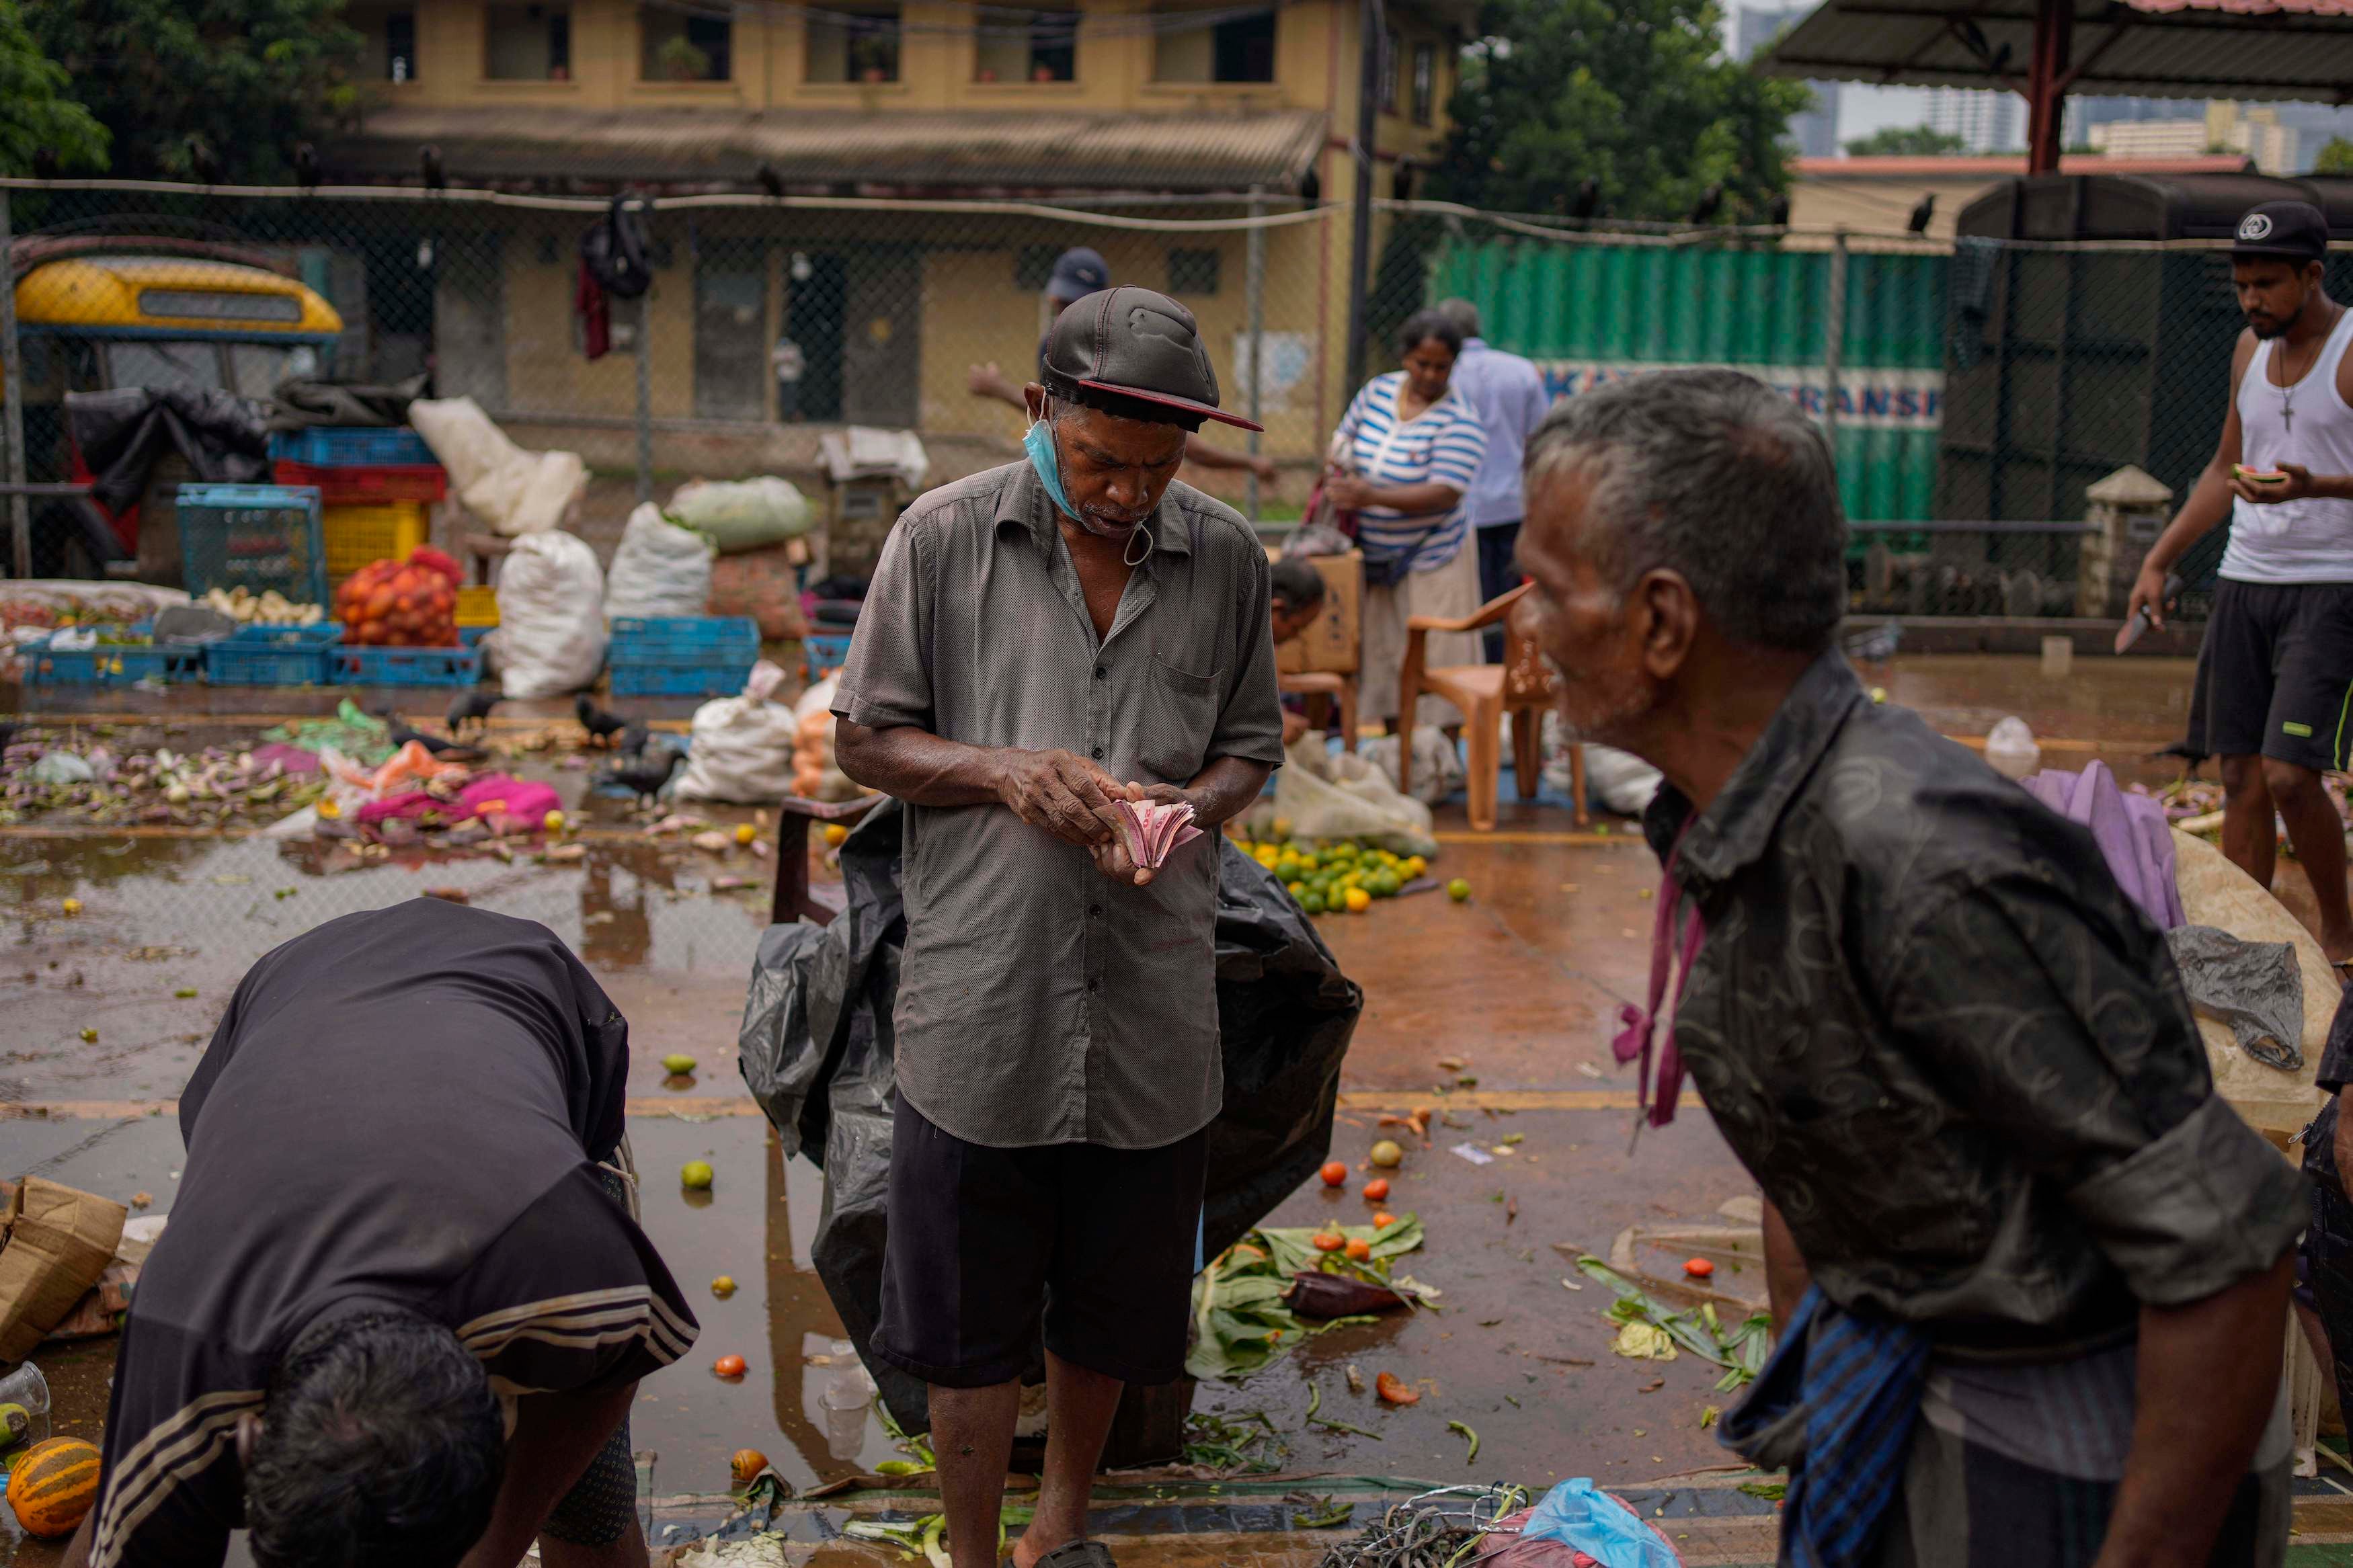 A man counts money at a marketplace in Colombo, Sri Lanka